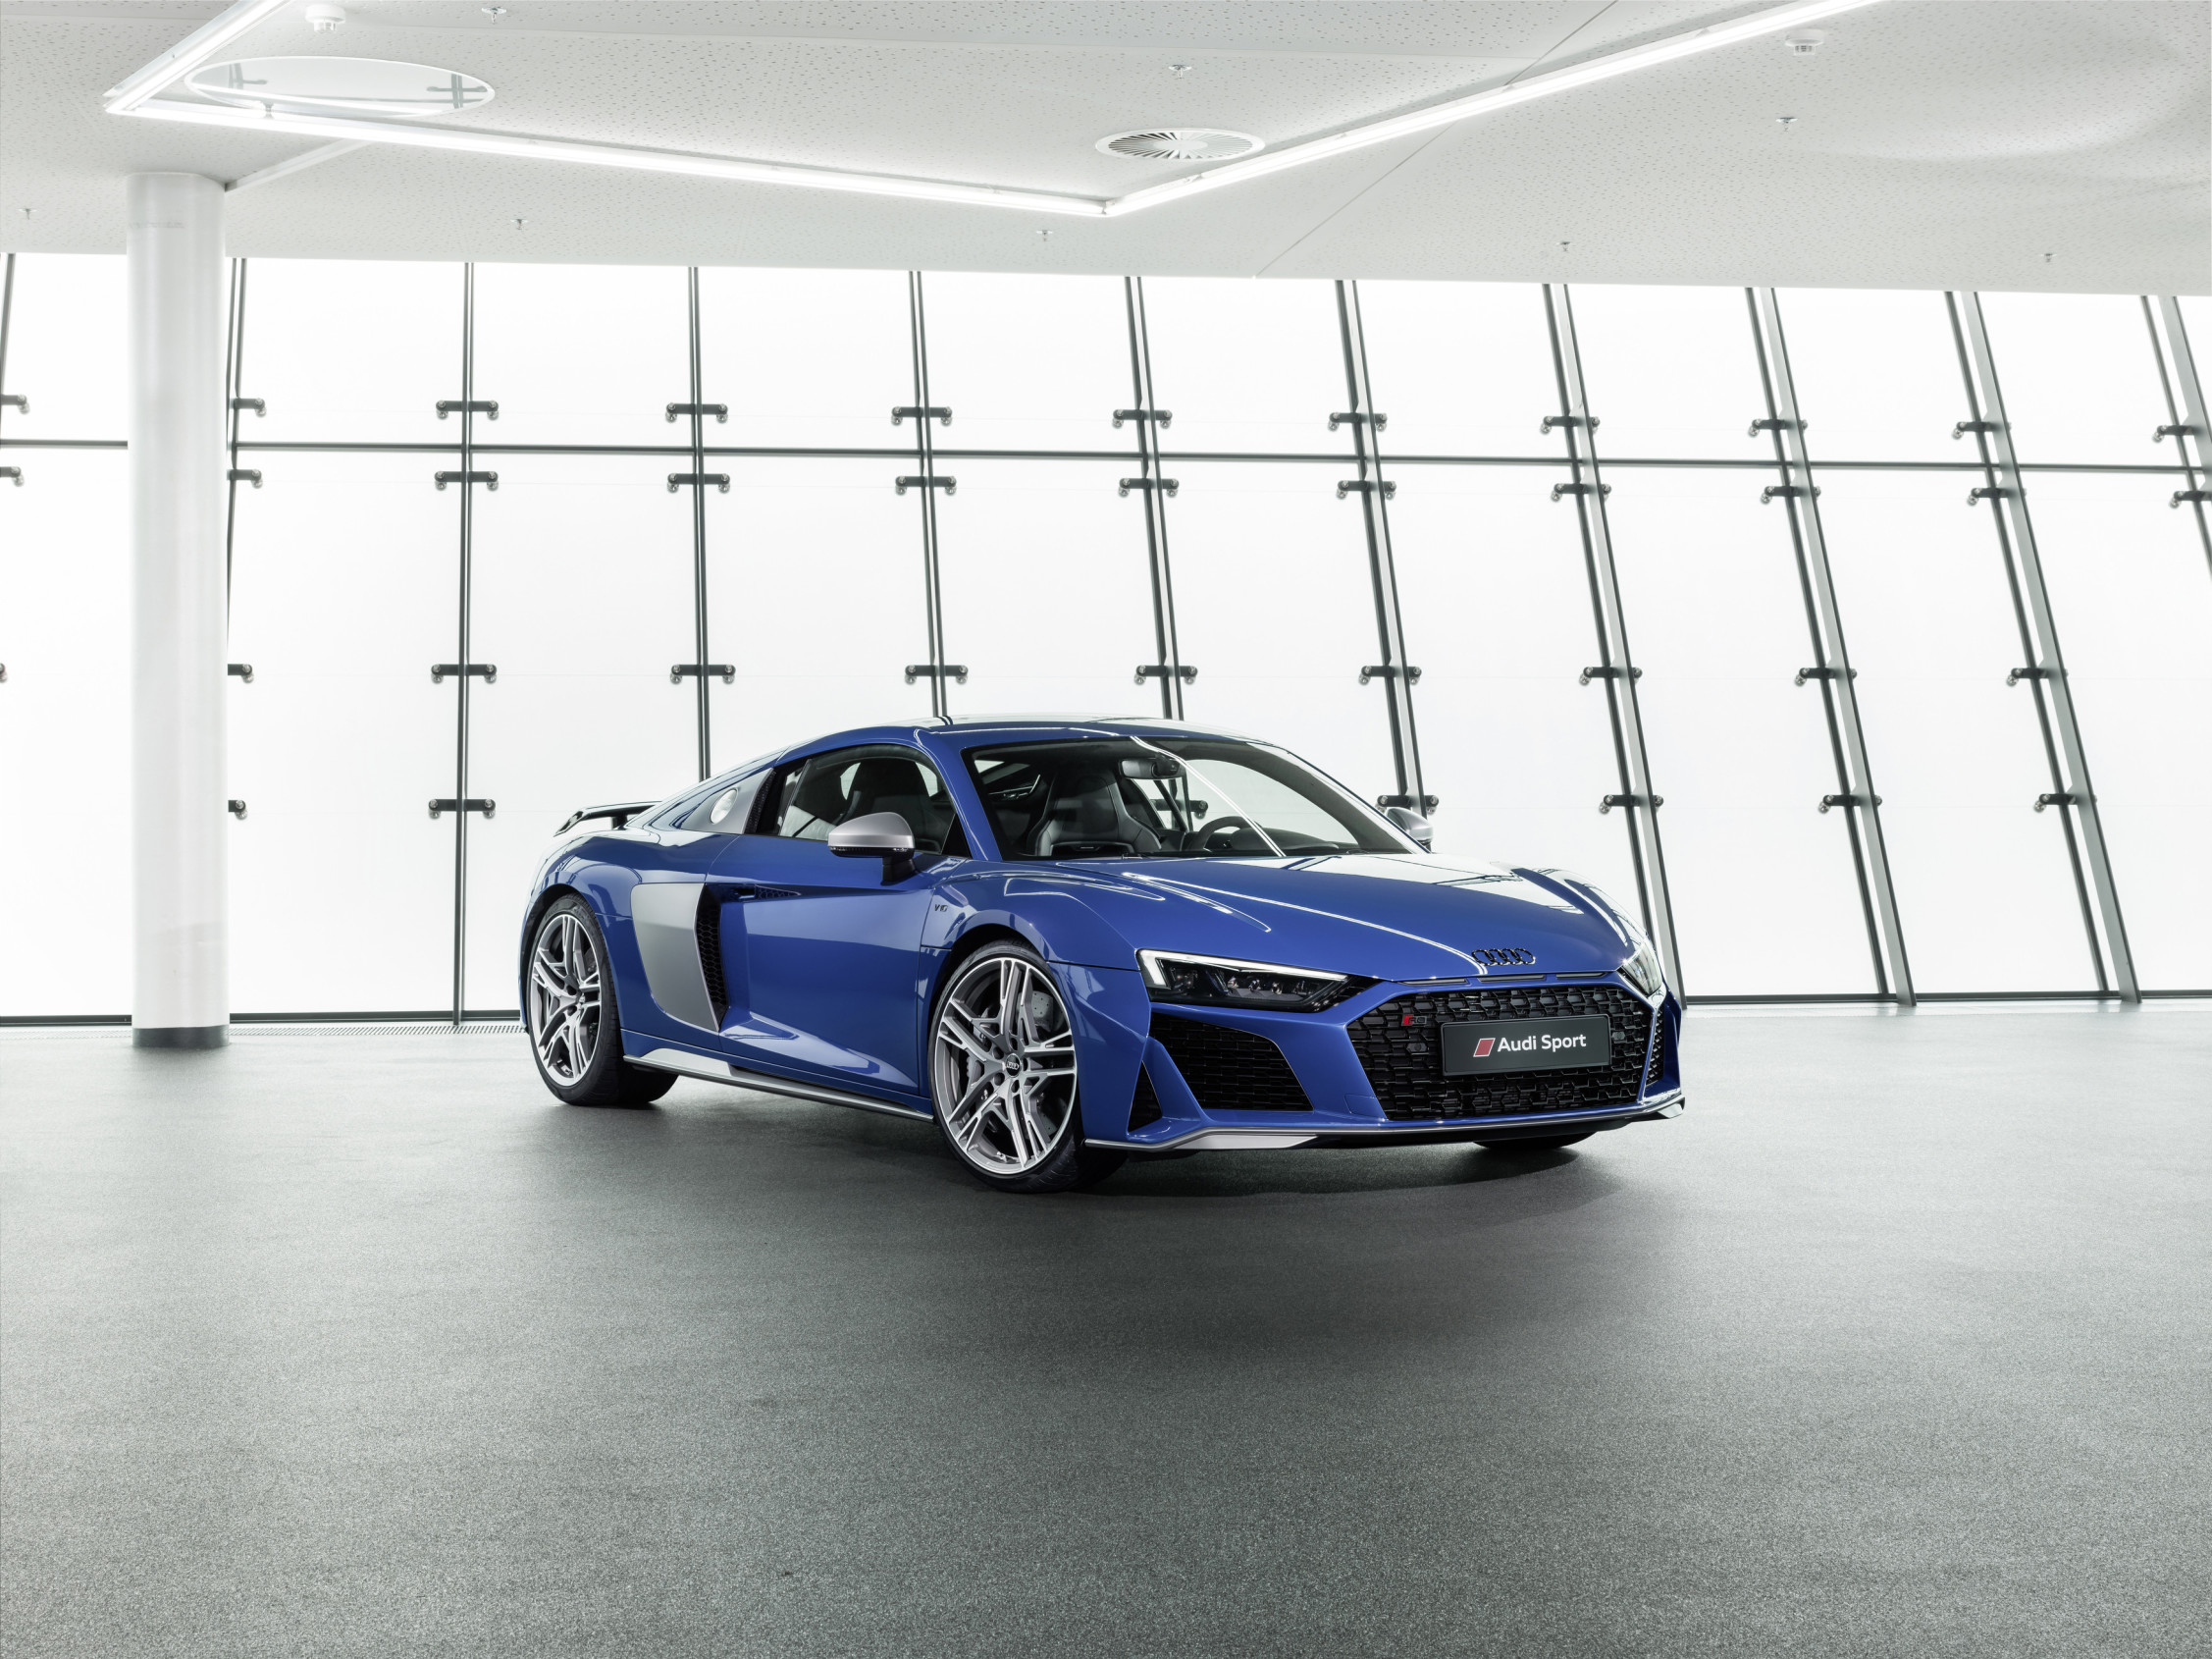 Delivery of the upgraded Audi R8 V10 has begun for "VIP customers"